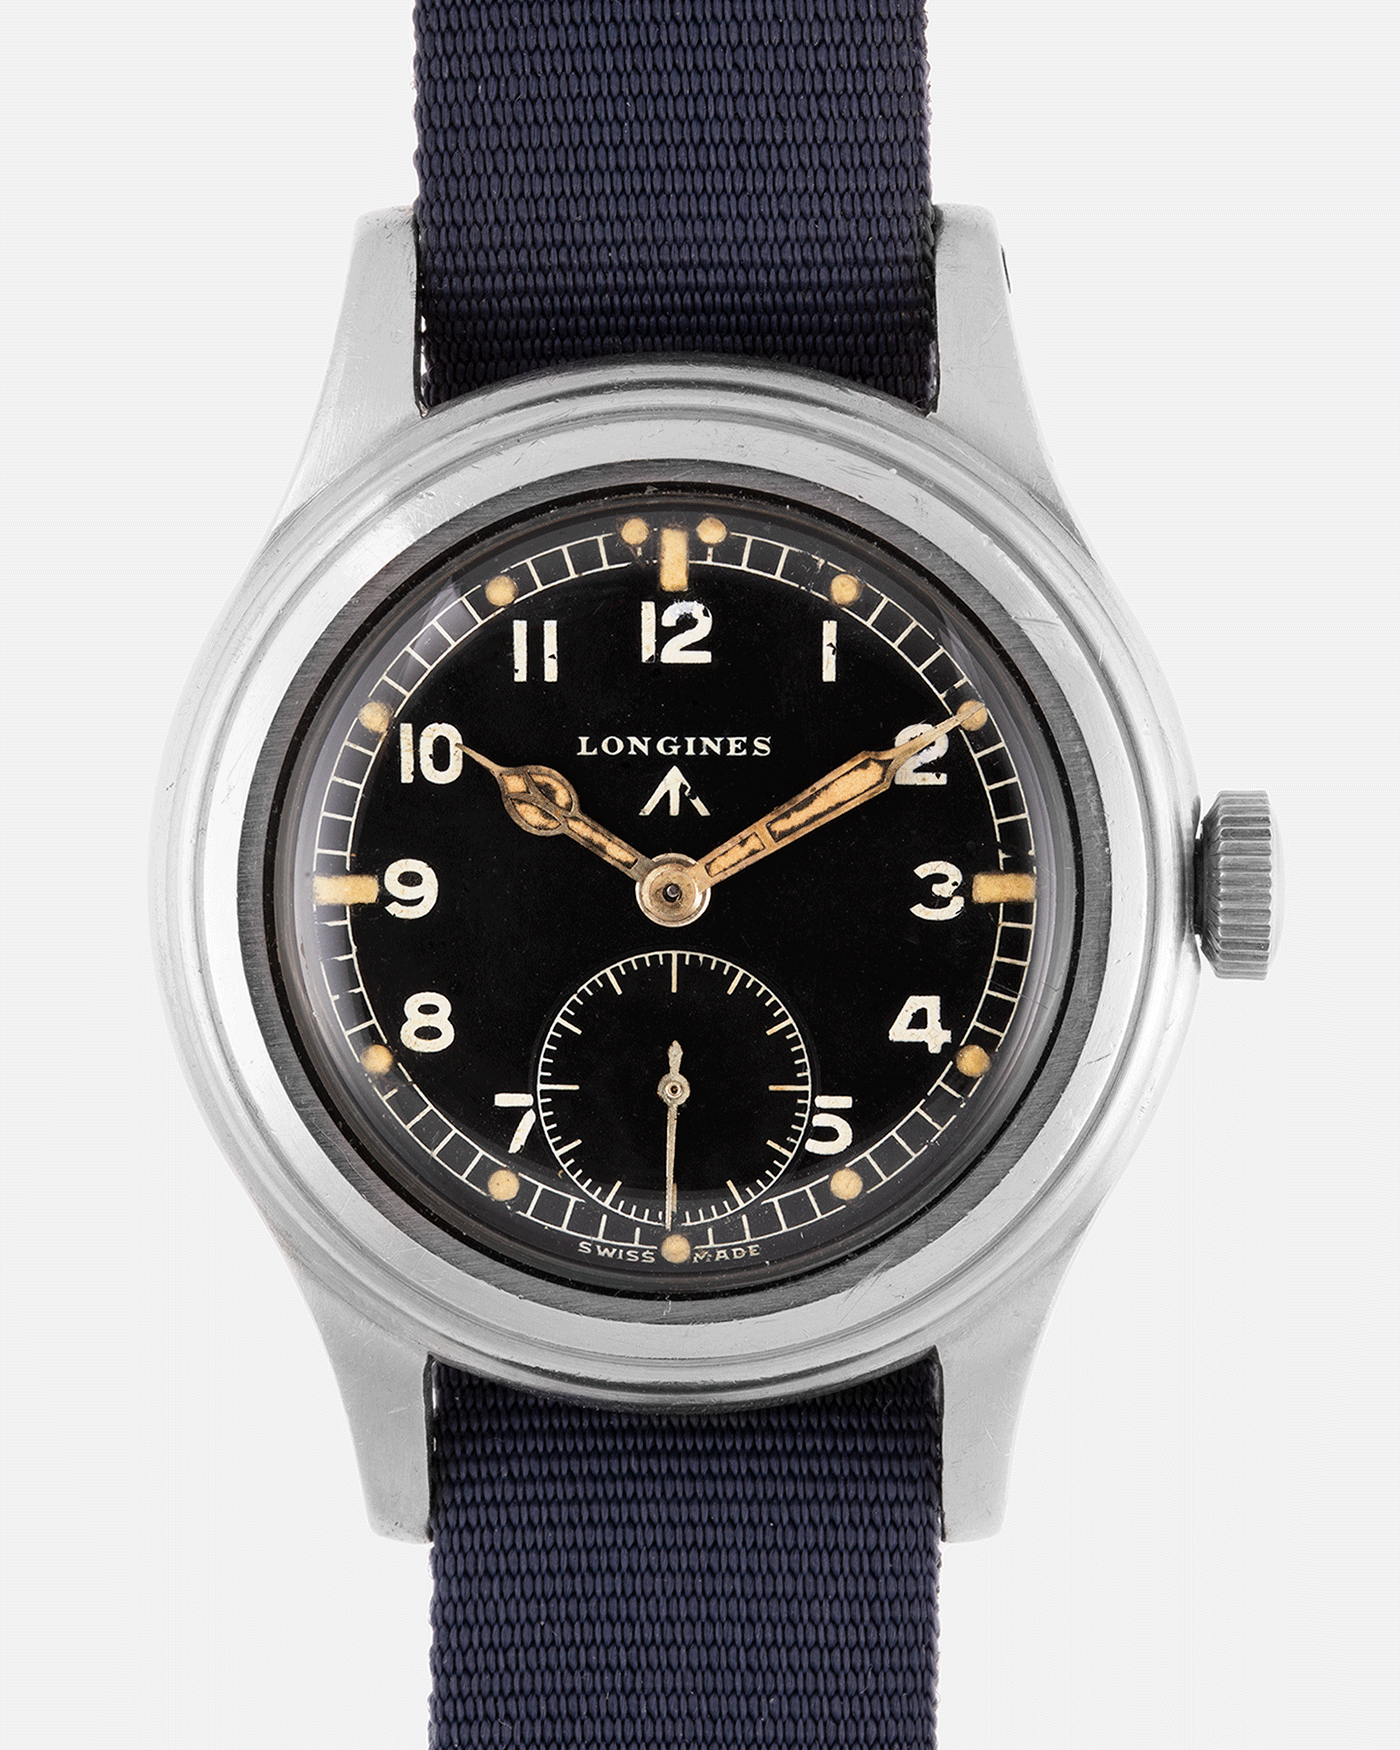 Longines 'Dirty Dozen' W.W.W. Vintage British Military Watch | S.Song Vintage Watches For Sale